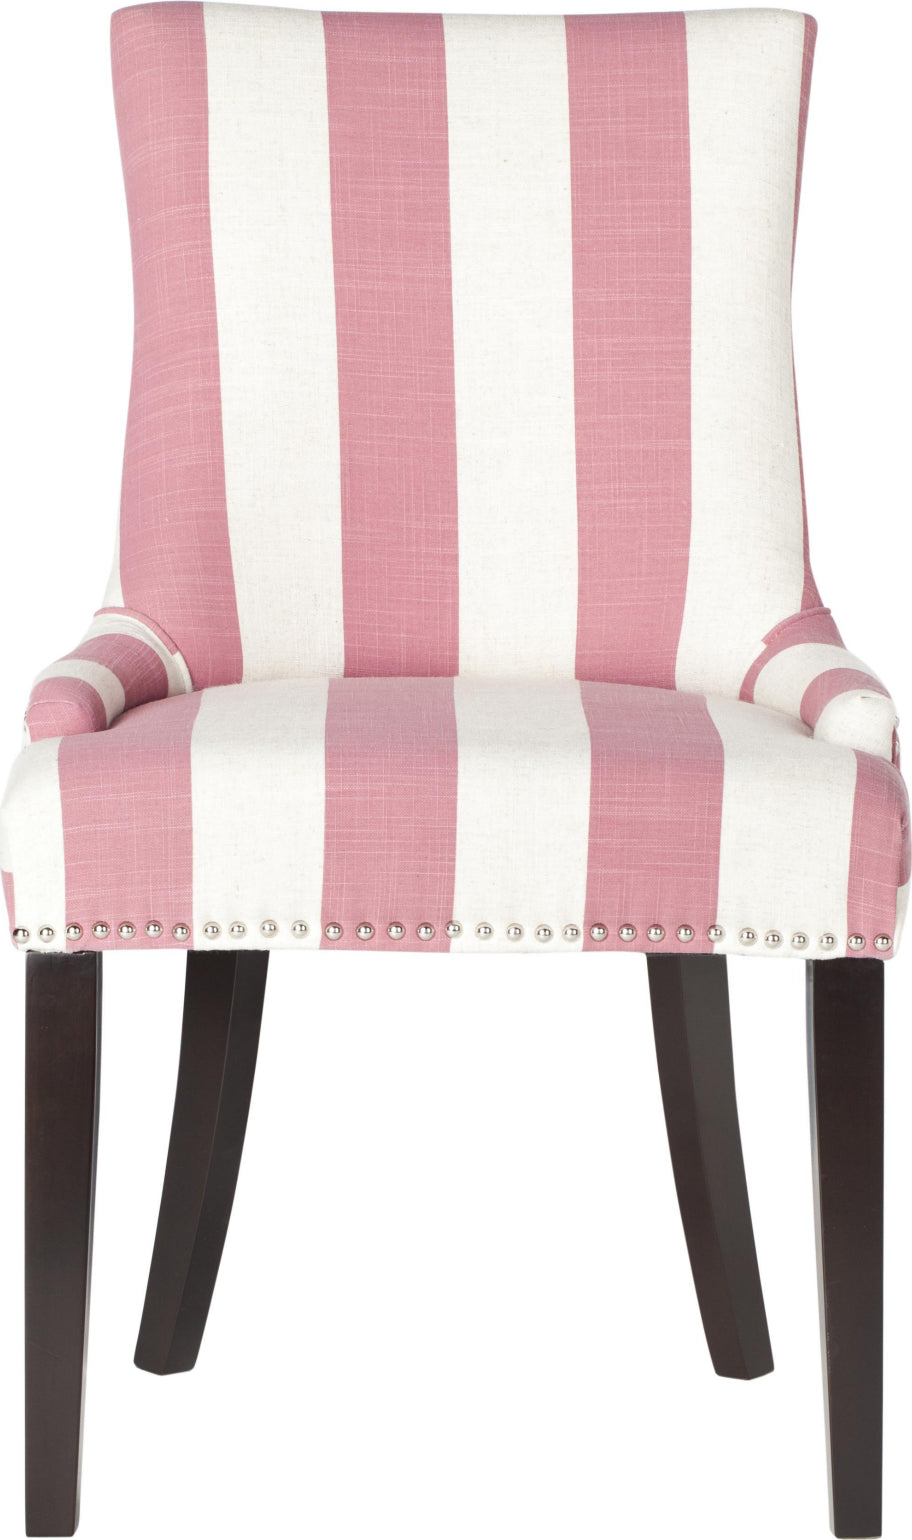 Safavieh Lester 19''H Awning Stripes Dining Chair-Silver Nail Heads Pink and White Espresso Furniture main image